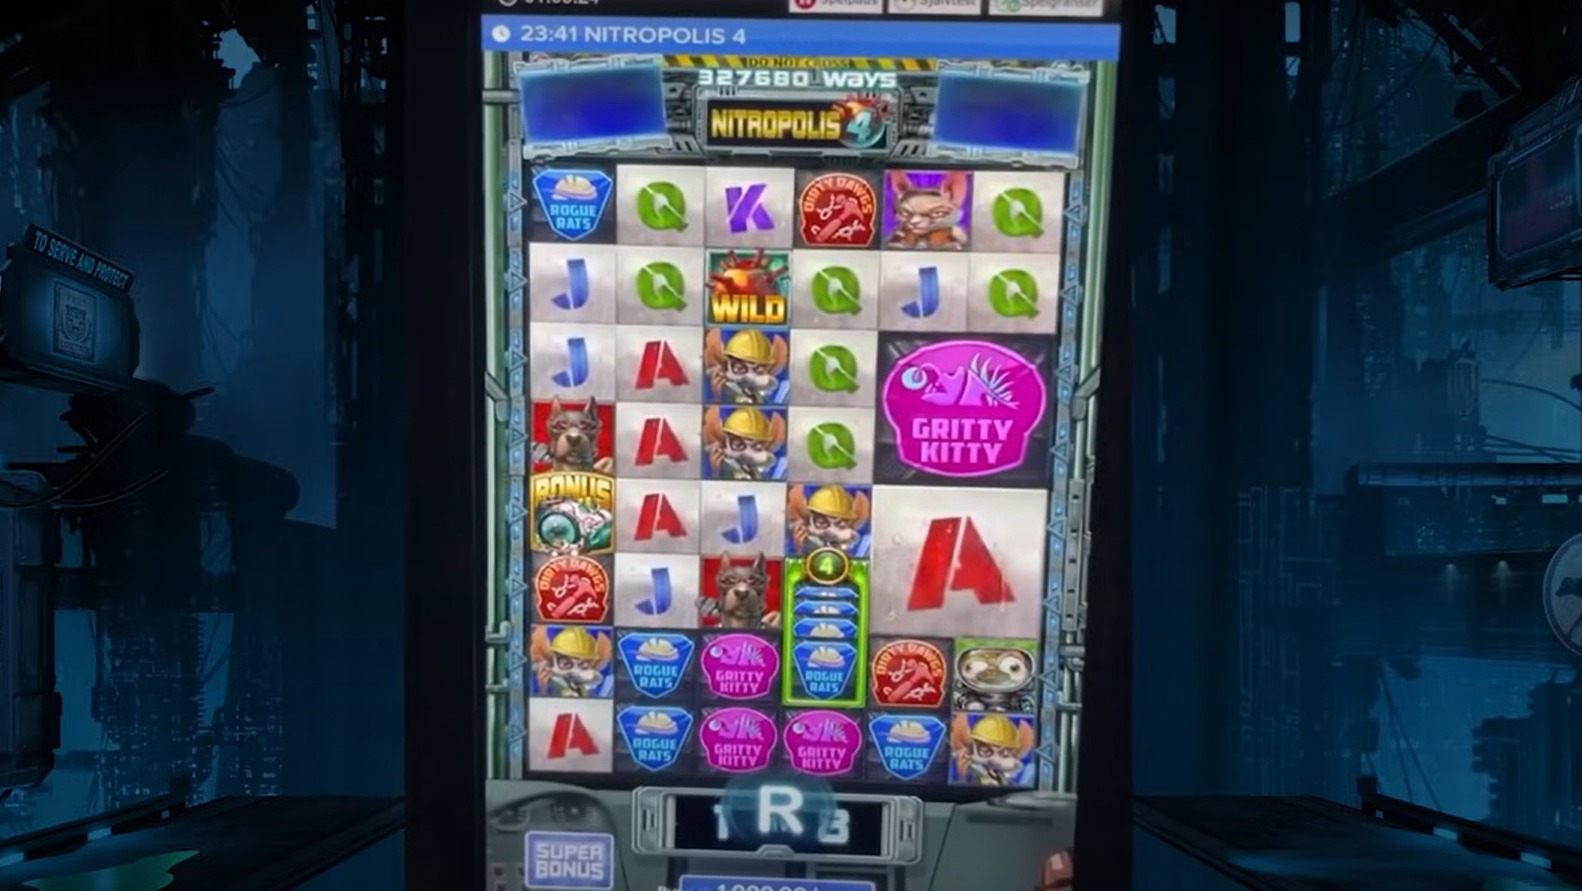 RTP in Online Casinos - can casinos control it